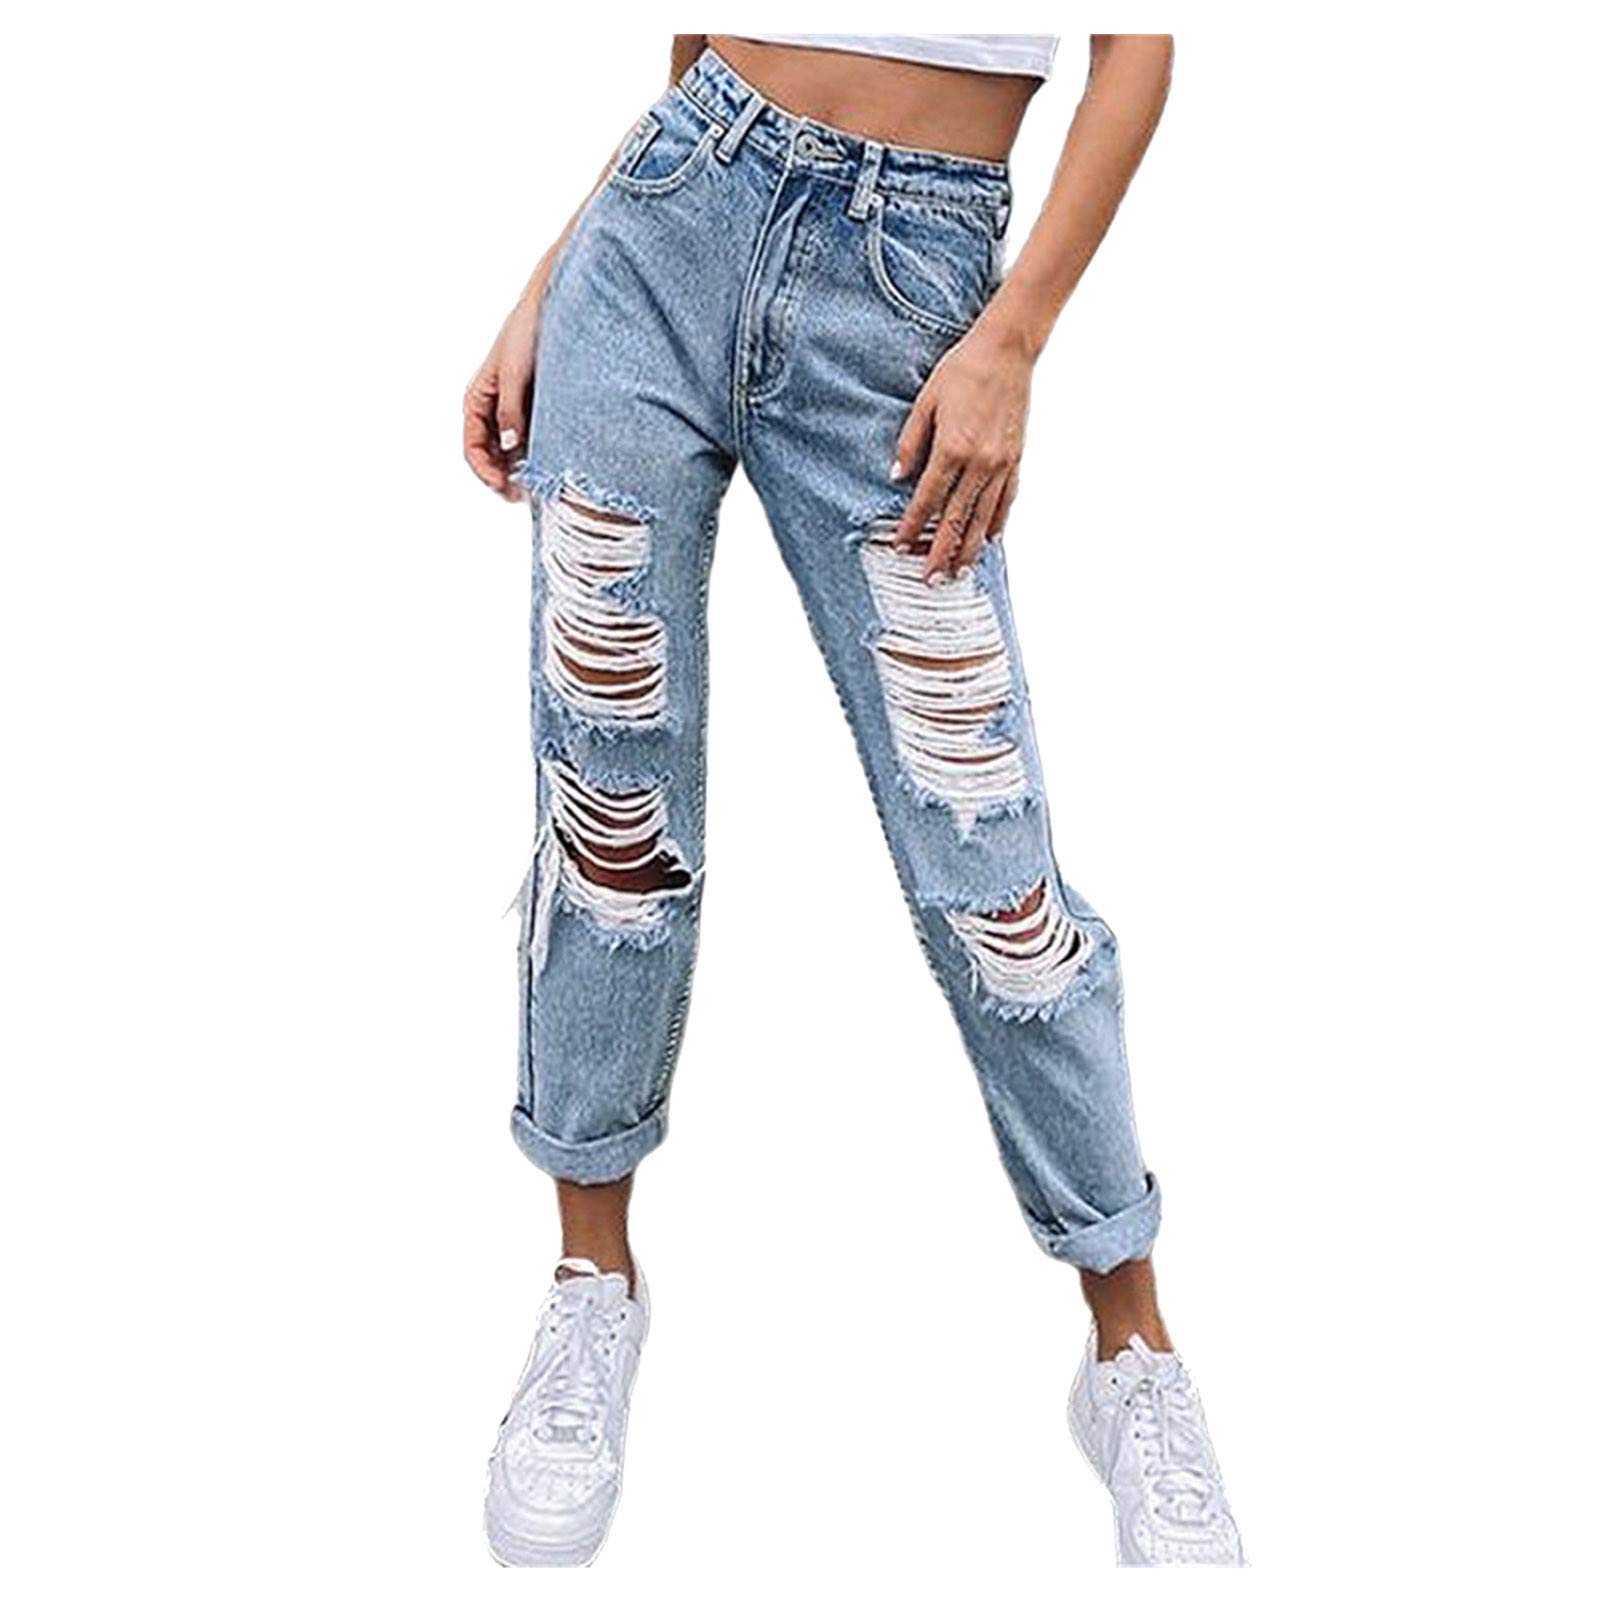 Jeans for Women High Waisted Stretch Baggy Straight Leg Ripped Best ...